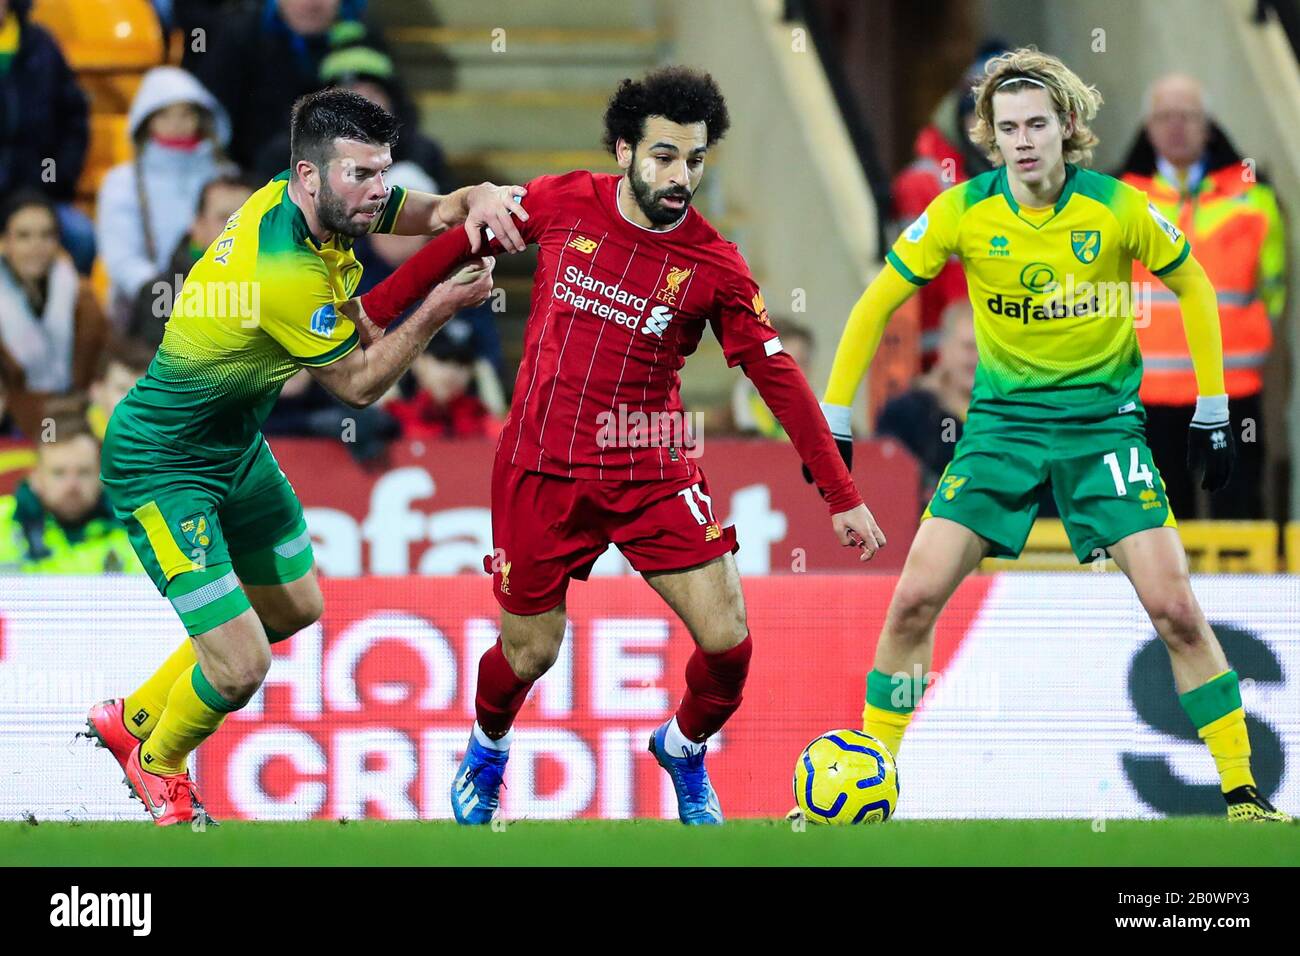 15th February 2020, Carrow Road, Norwich, England; Premier League, Norwich City v Liverpool : Mohamed Salah (11) of Liverpool is flanked by Grant Hanley (05) of Norwich City and Todd Cantwell (14) of Norwich City Stock Photo